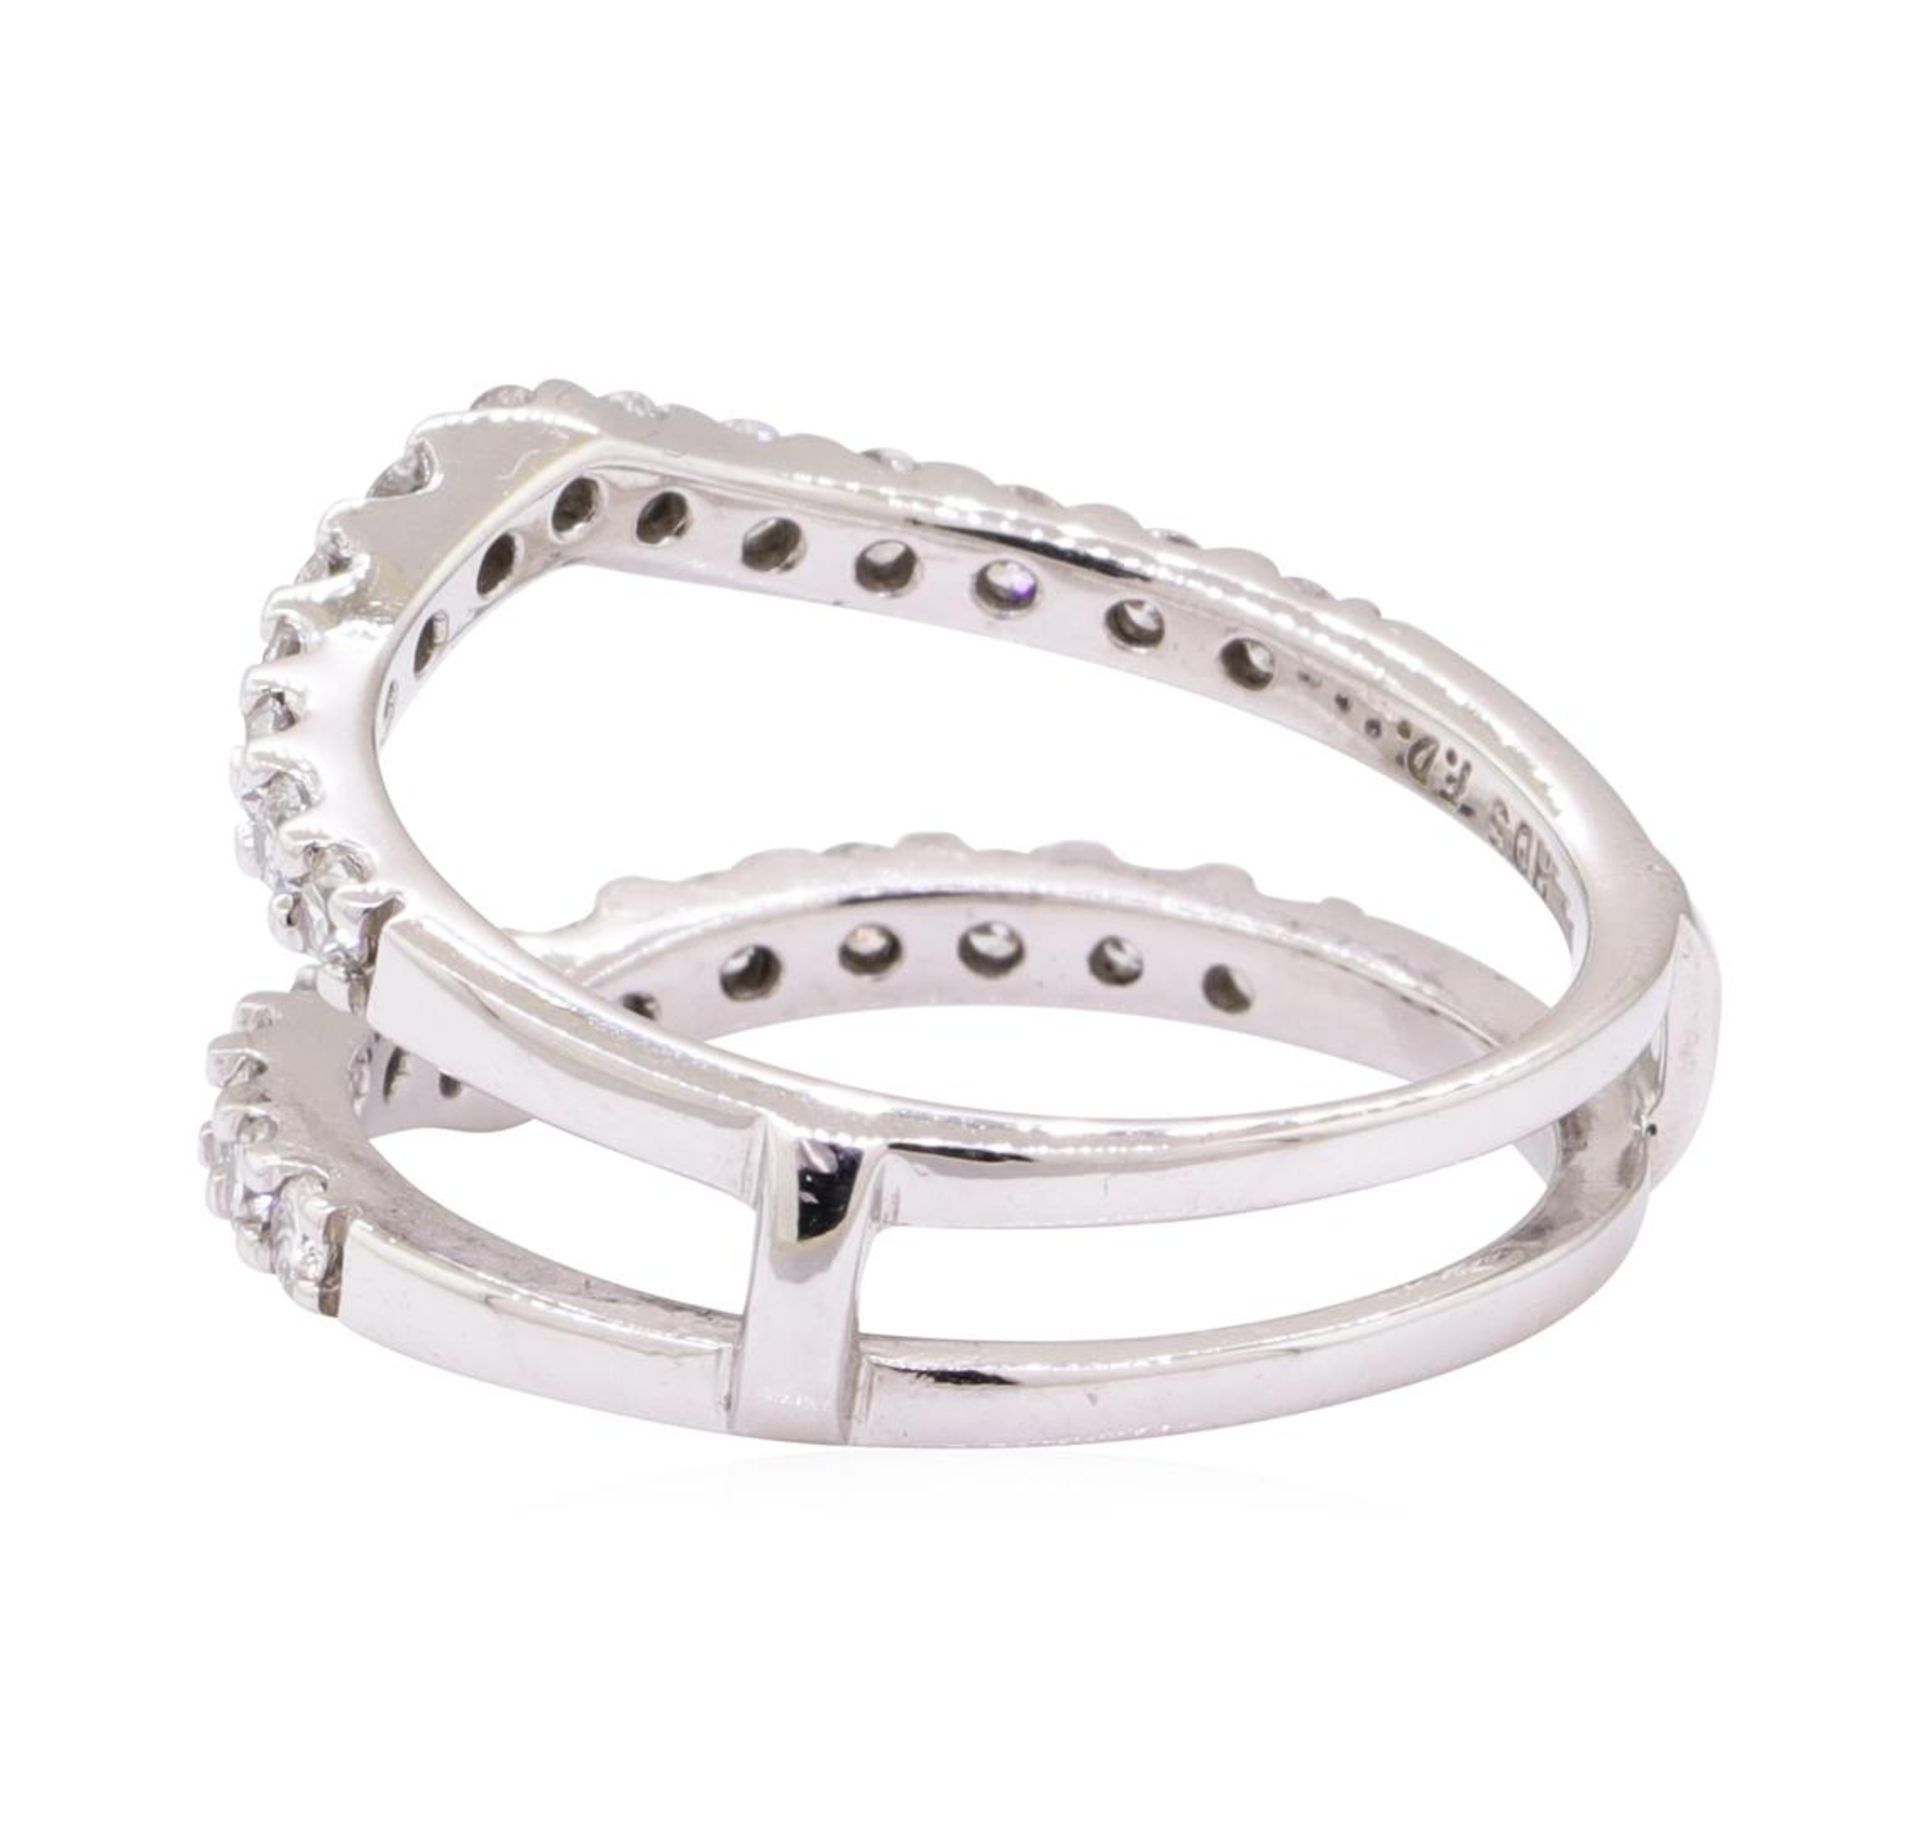 0.90ctw Diamond Ring Guard - 14KT White Gold - Image 3 of 4